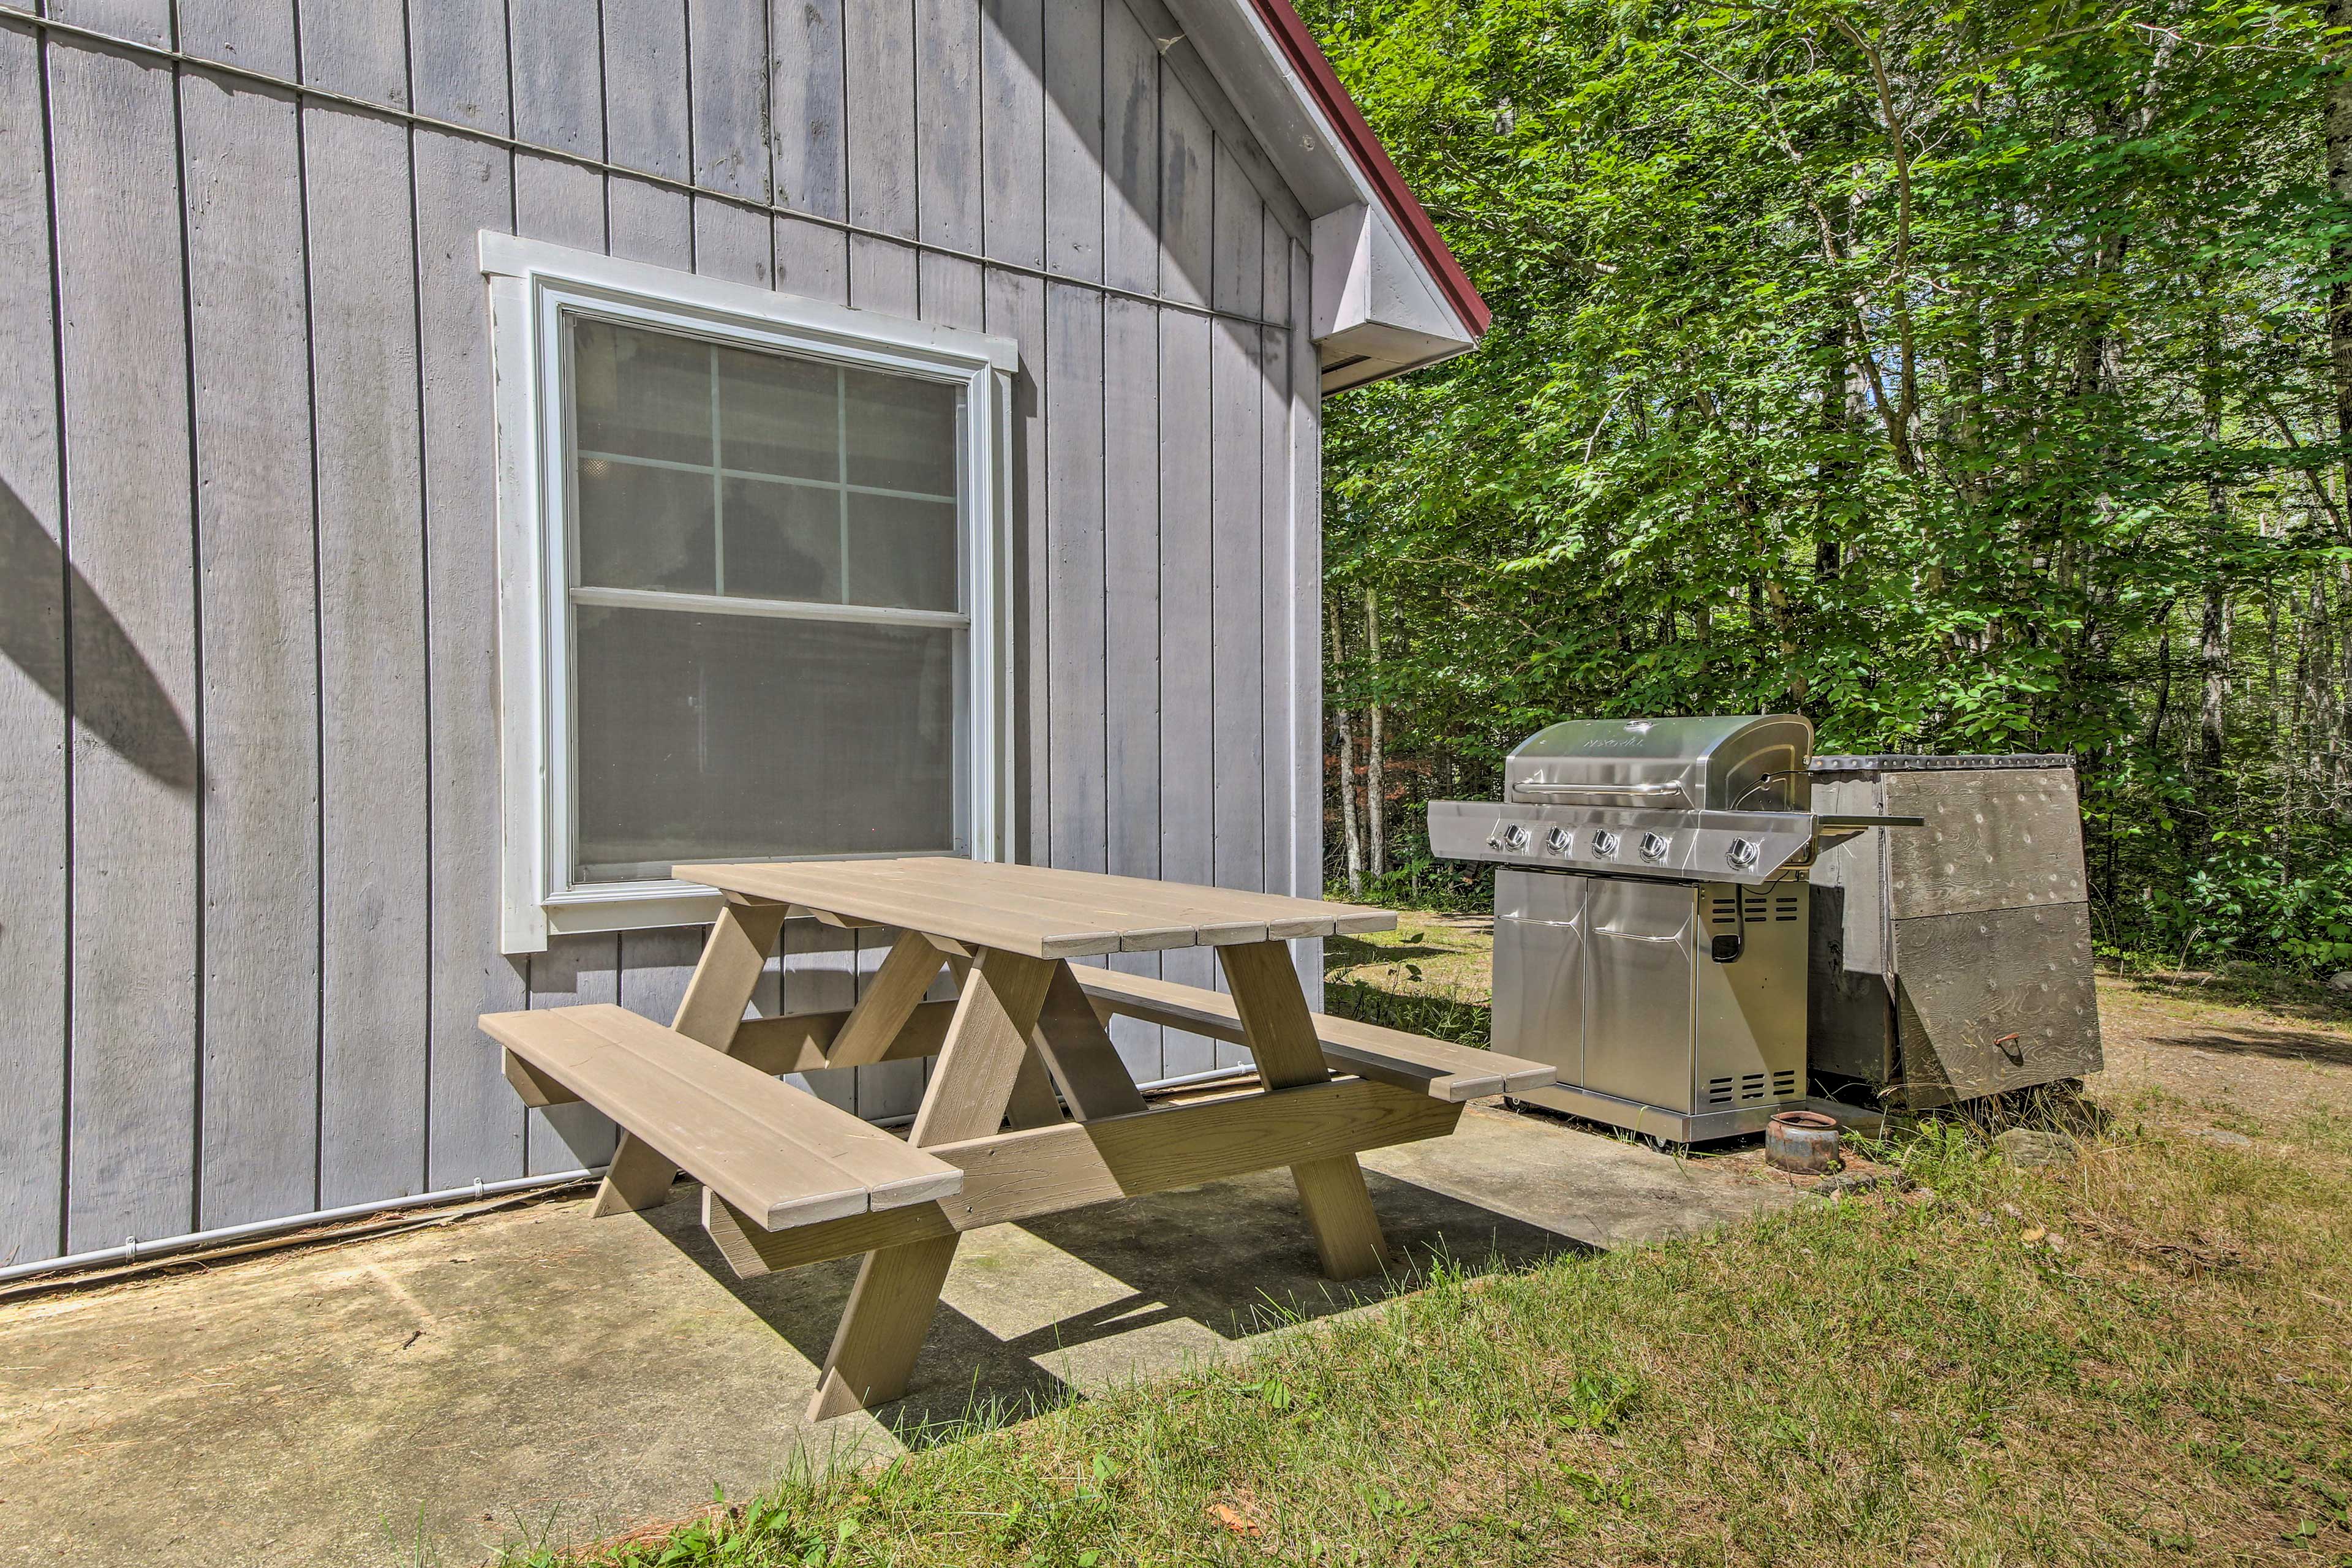 Patio | Gas Grill | Picnic Table | Outdoor Seating